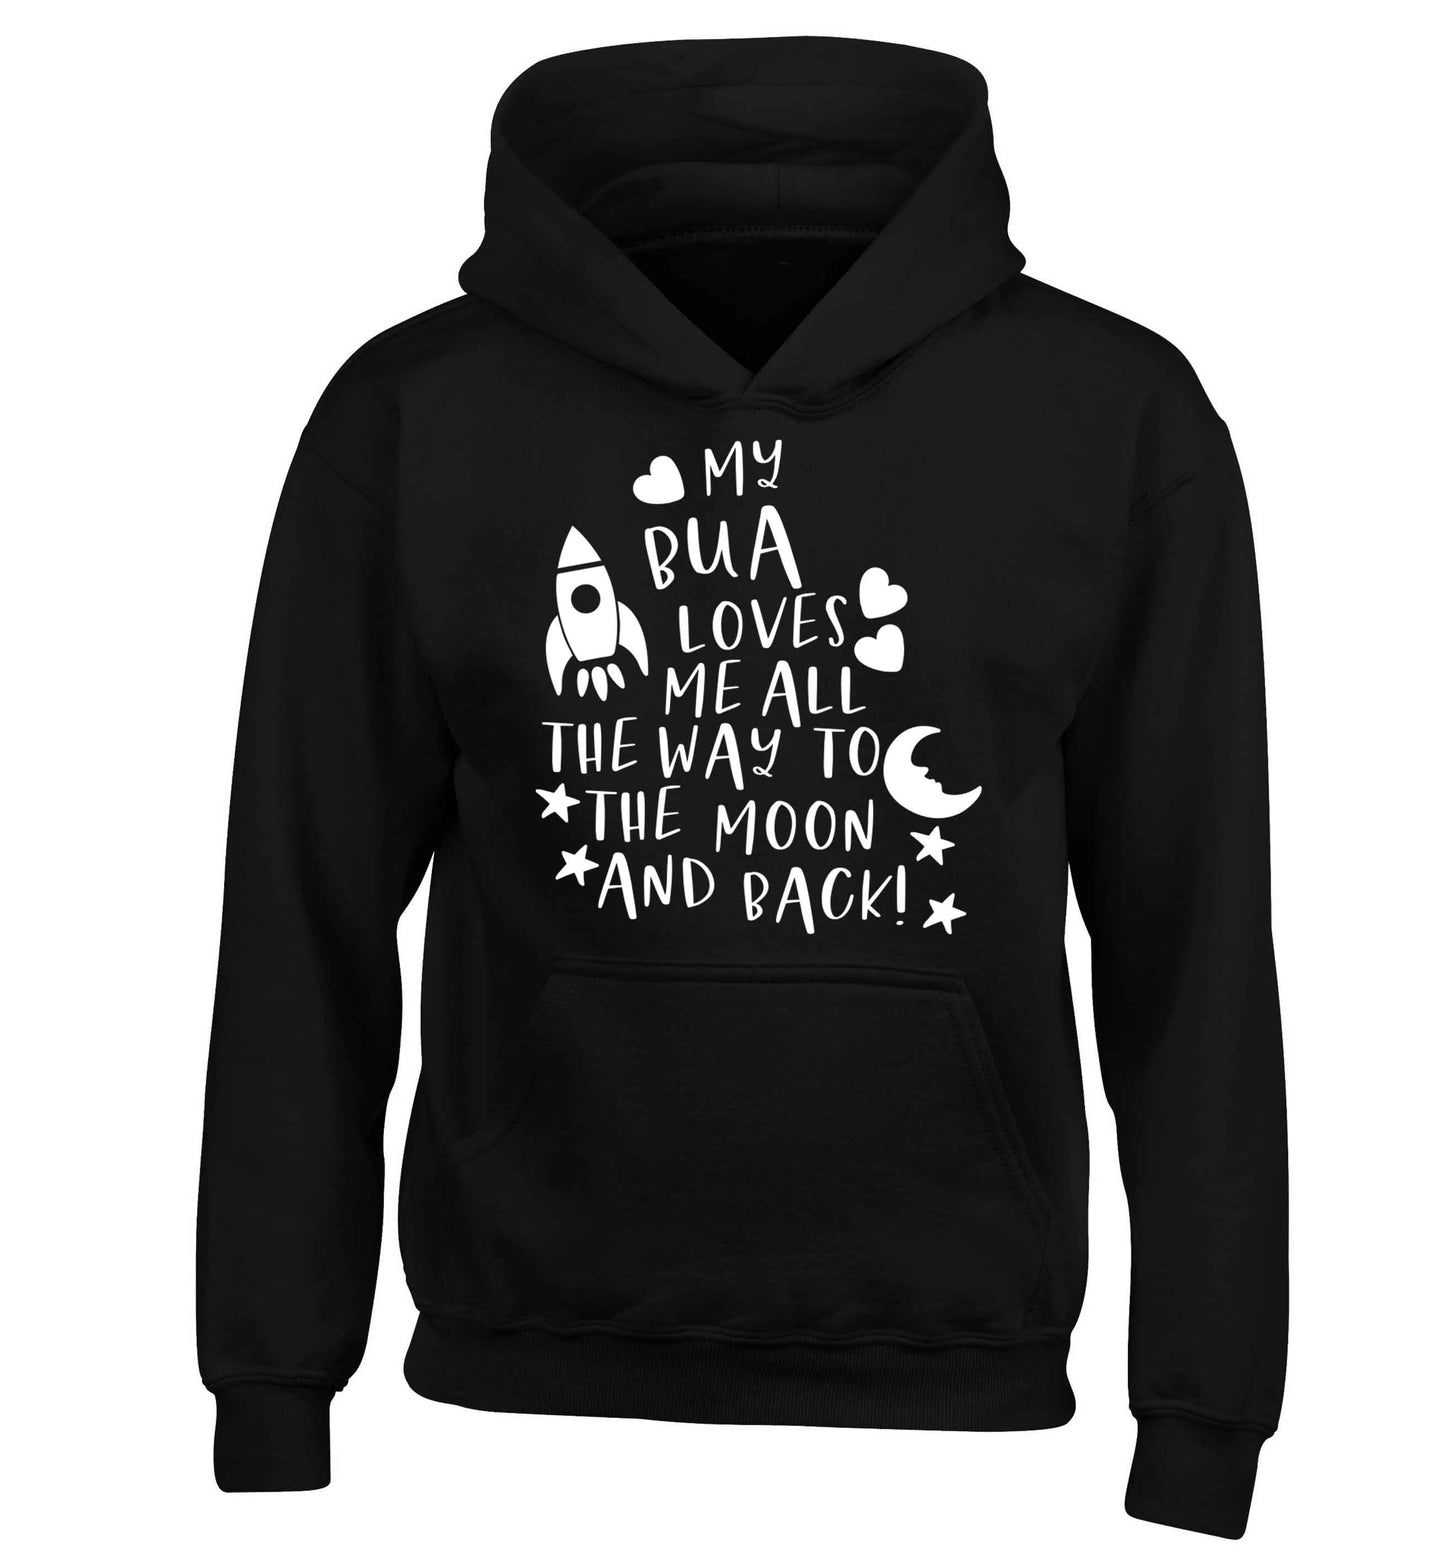 My bua loves me all they way to the moon and back children's black hoodie 12-13 Years